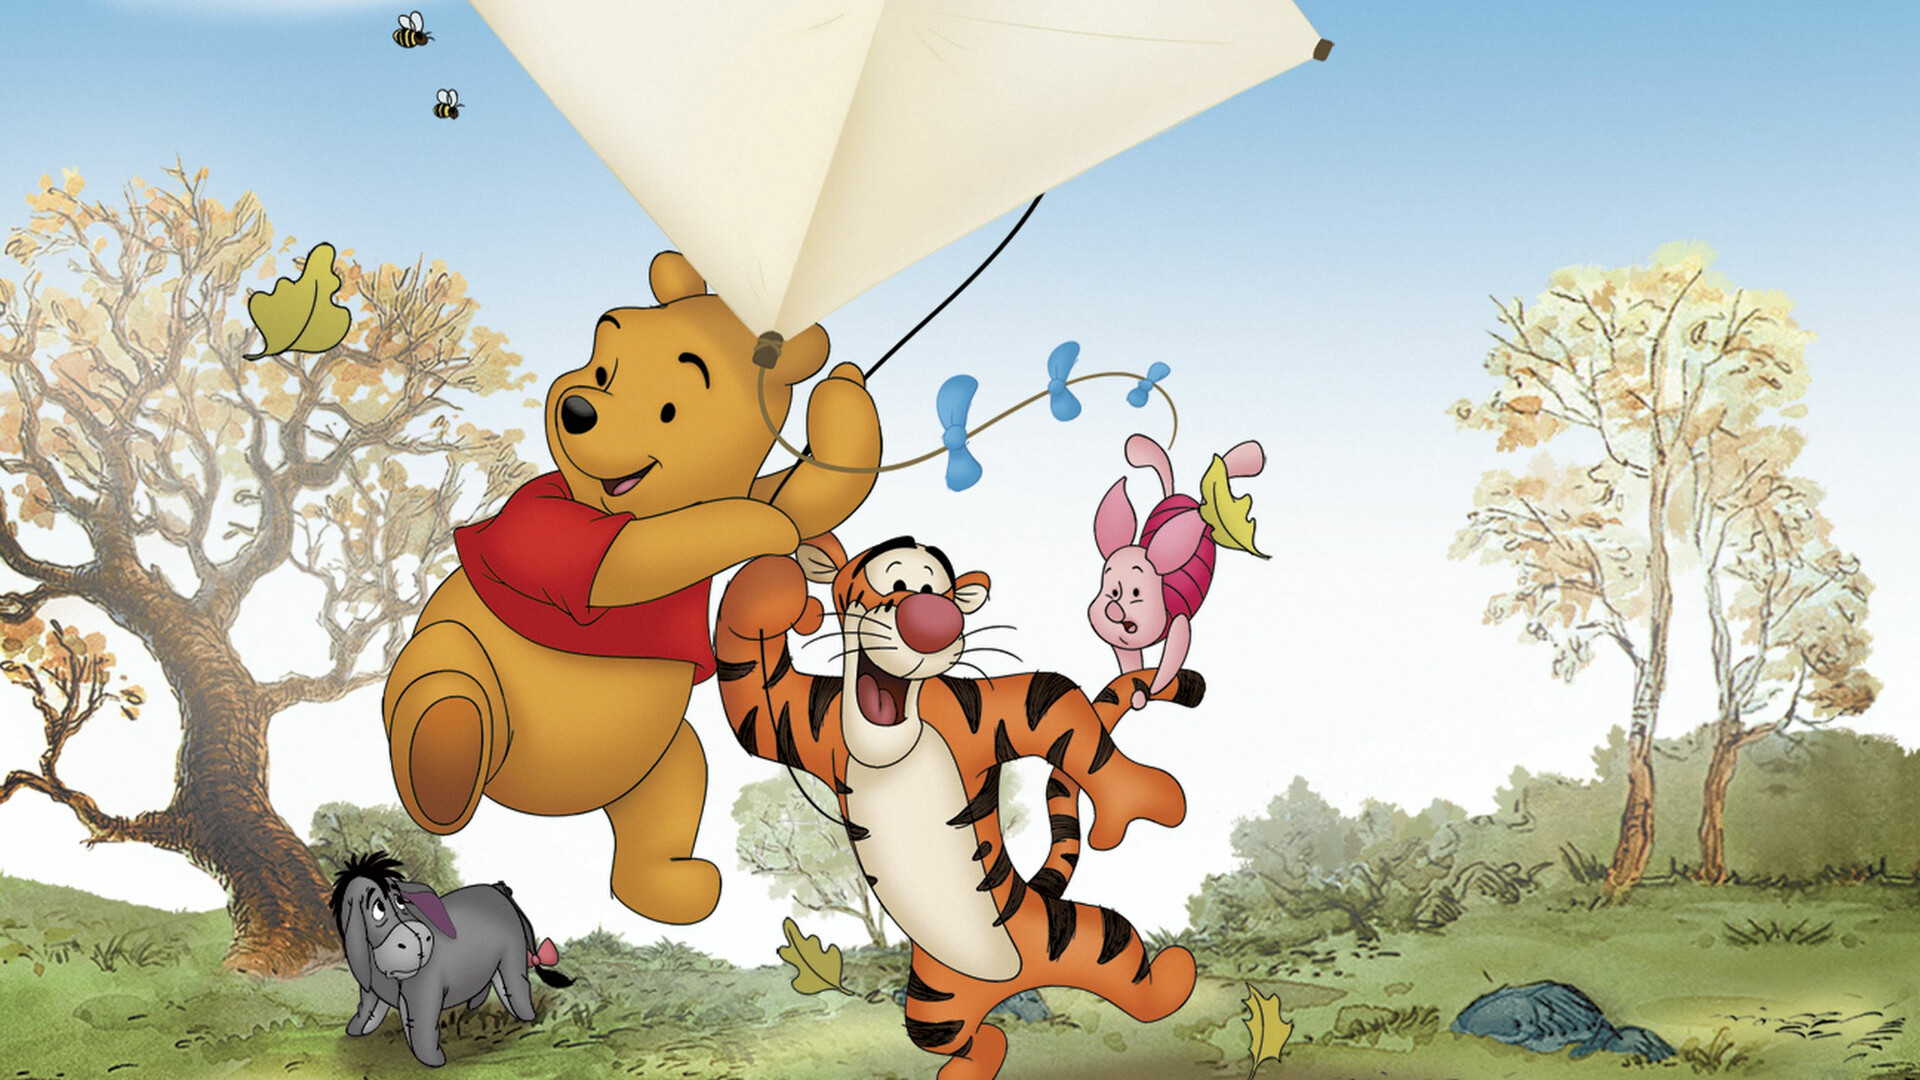 The Many Adventures of Winnie the Pooh: An adorable bear and his lovable friends embark on an epic adventure as they sing, dance, and chase bees through the Hundred Acre Woods. 1920x1080 Full HD Wallpaper.